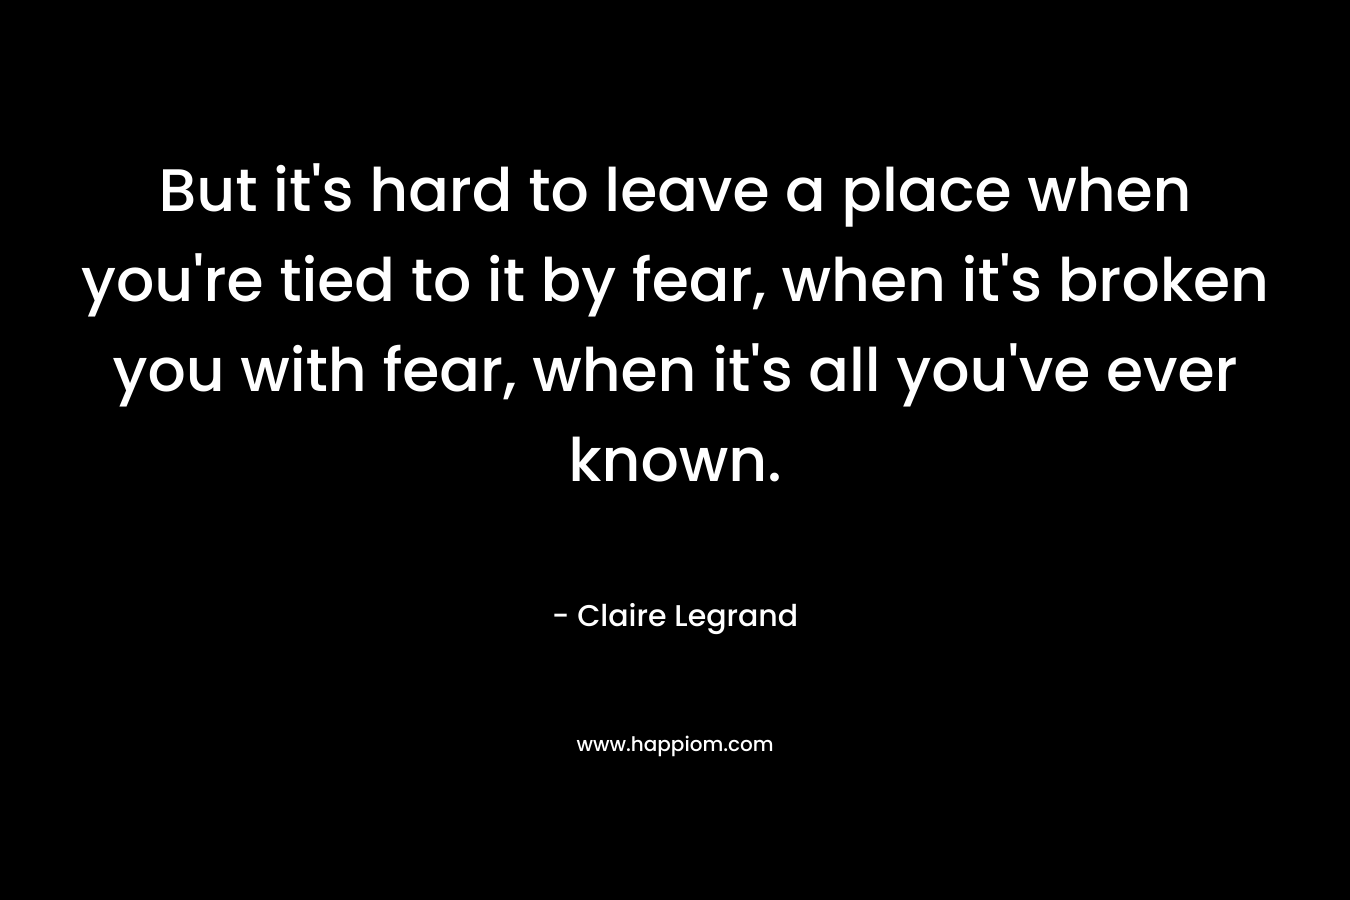 But it’s hard to leave a place when you’re tied to it by fear, when it’s broken you with fear, when it’s all you’ve ever known. – Claire Legrand